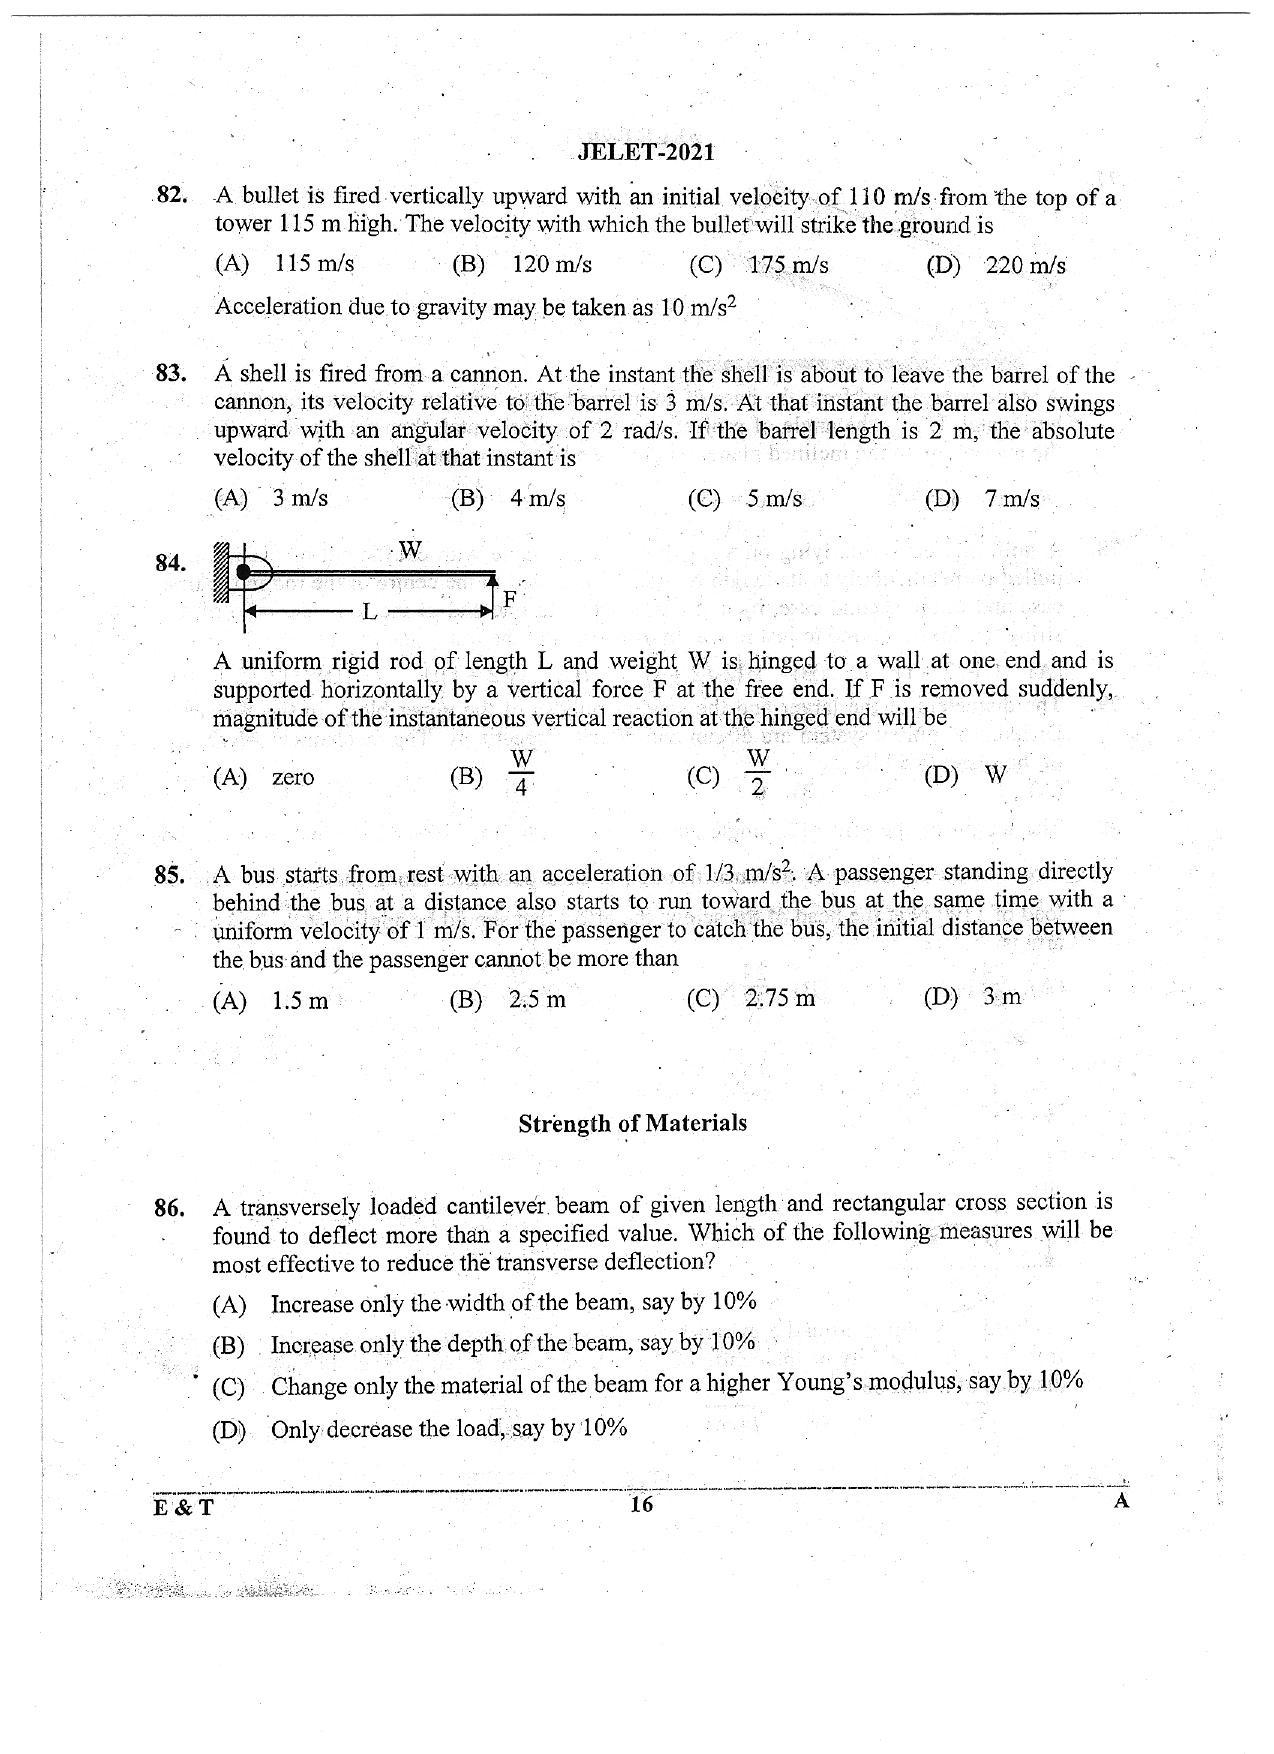 WBJEE  JELET 2021 ( Engg. & Tech.) - Page 16